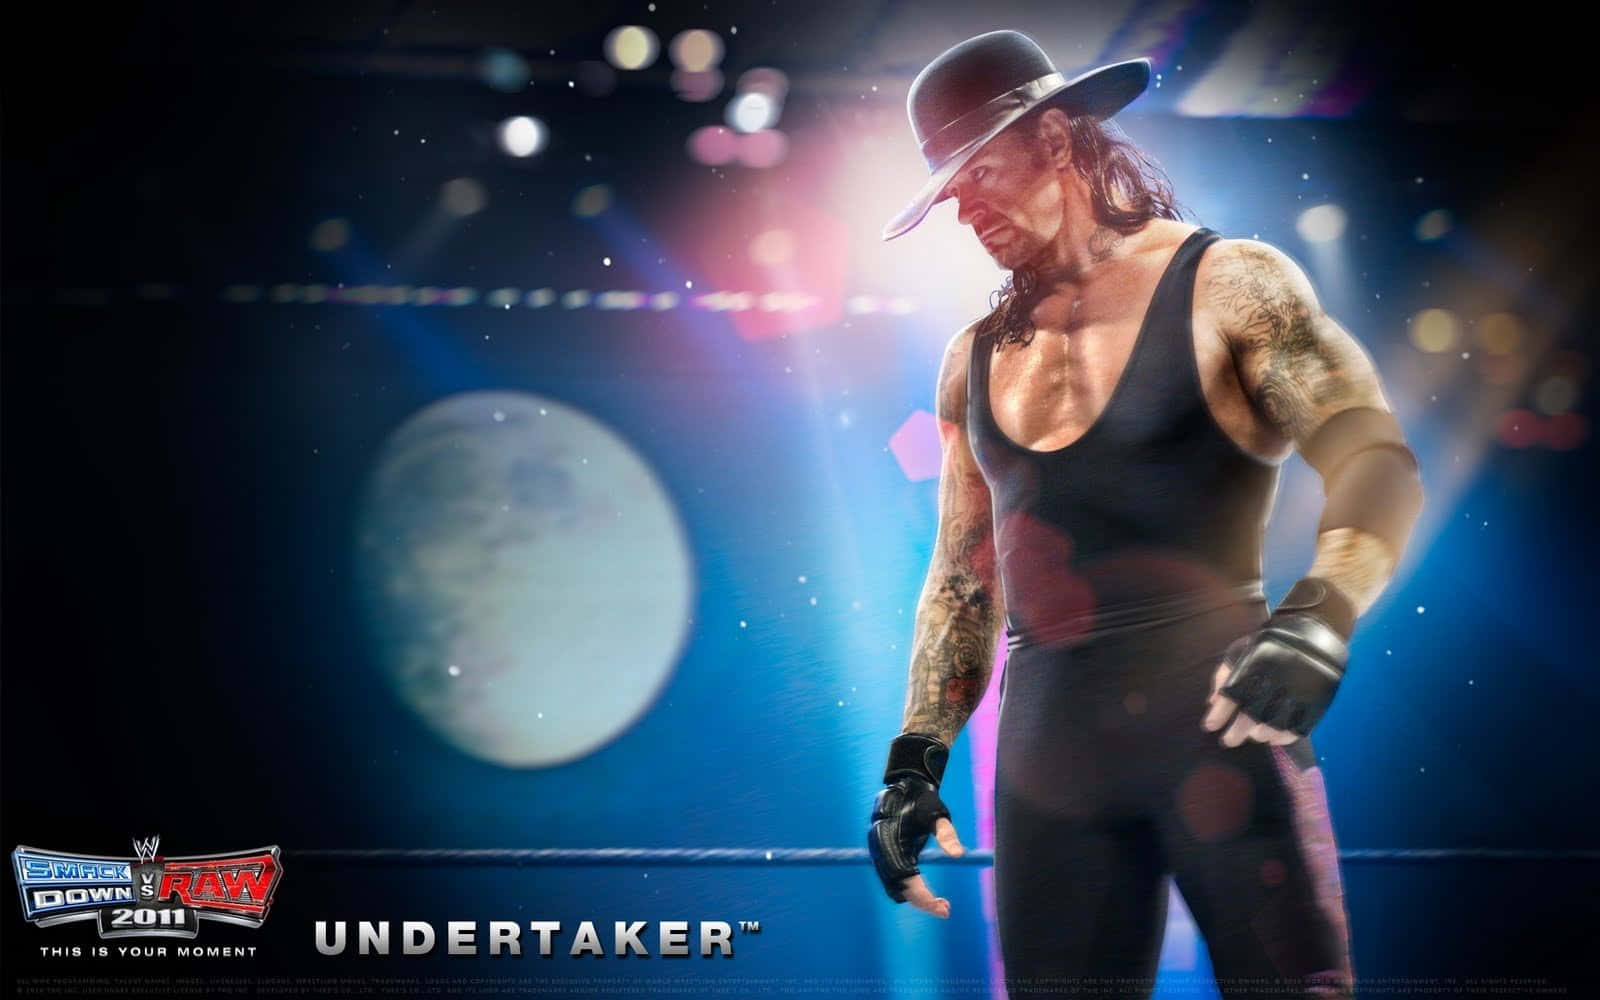 Get Your Look On with Cool WWE Wallpaper